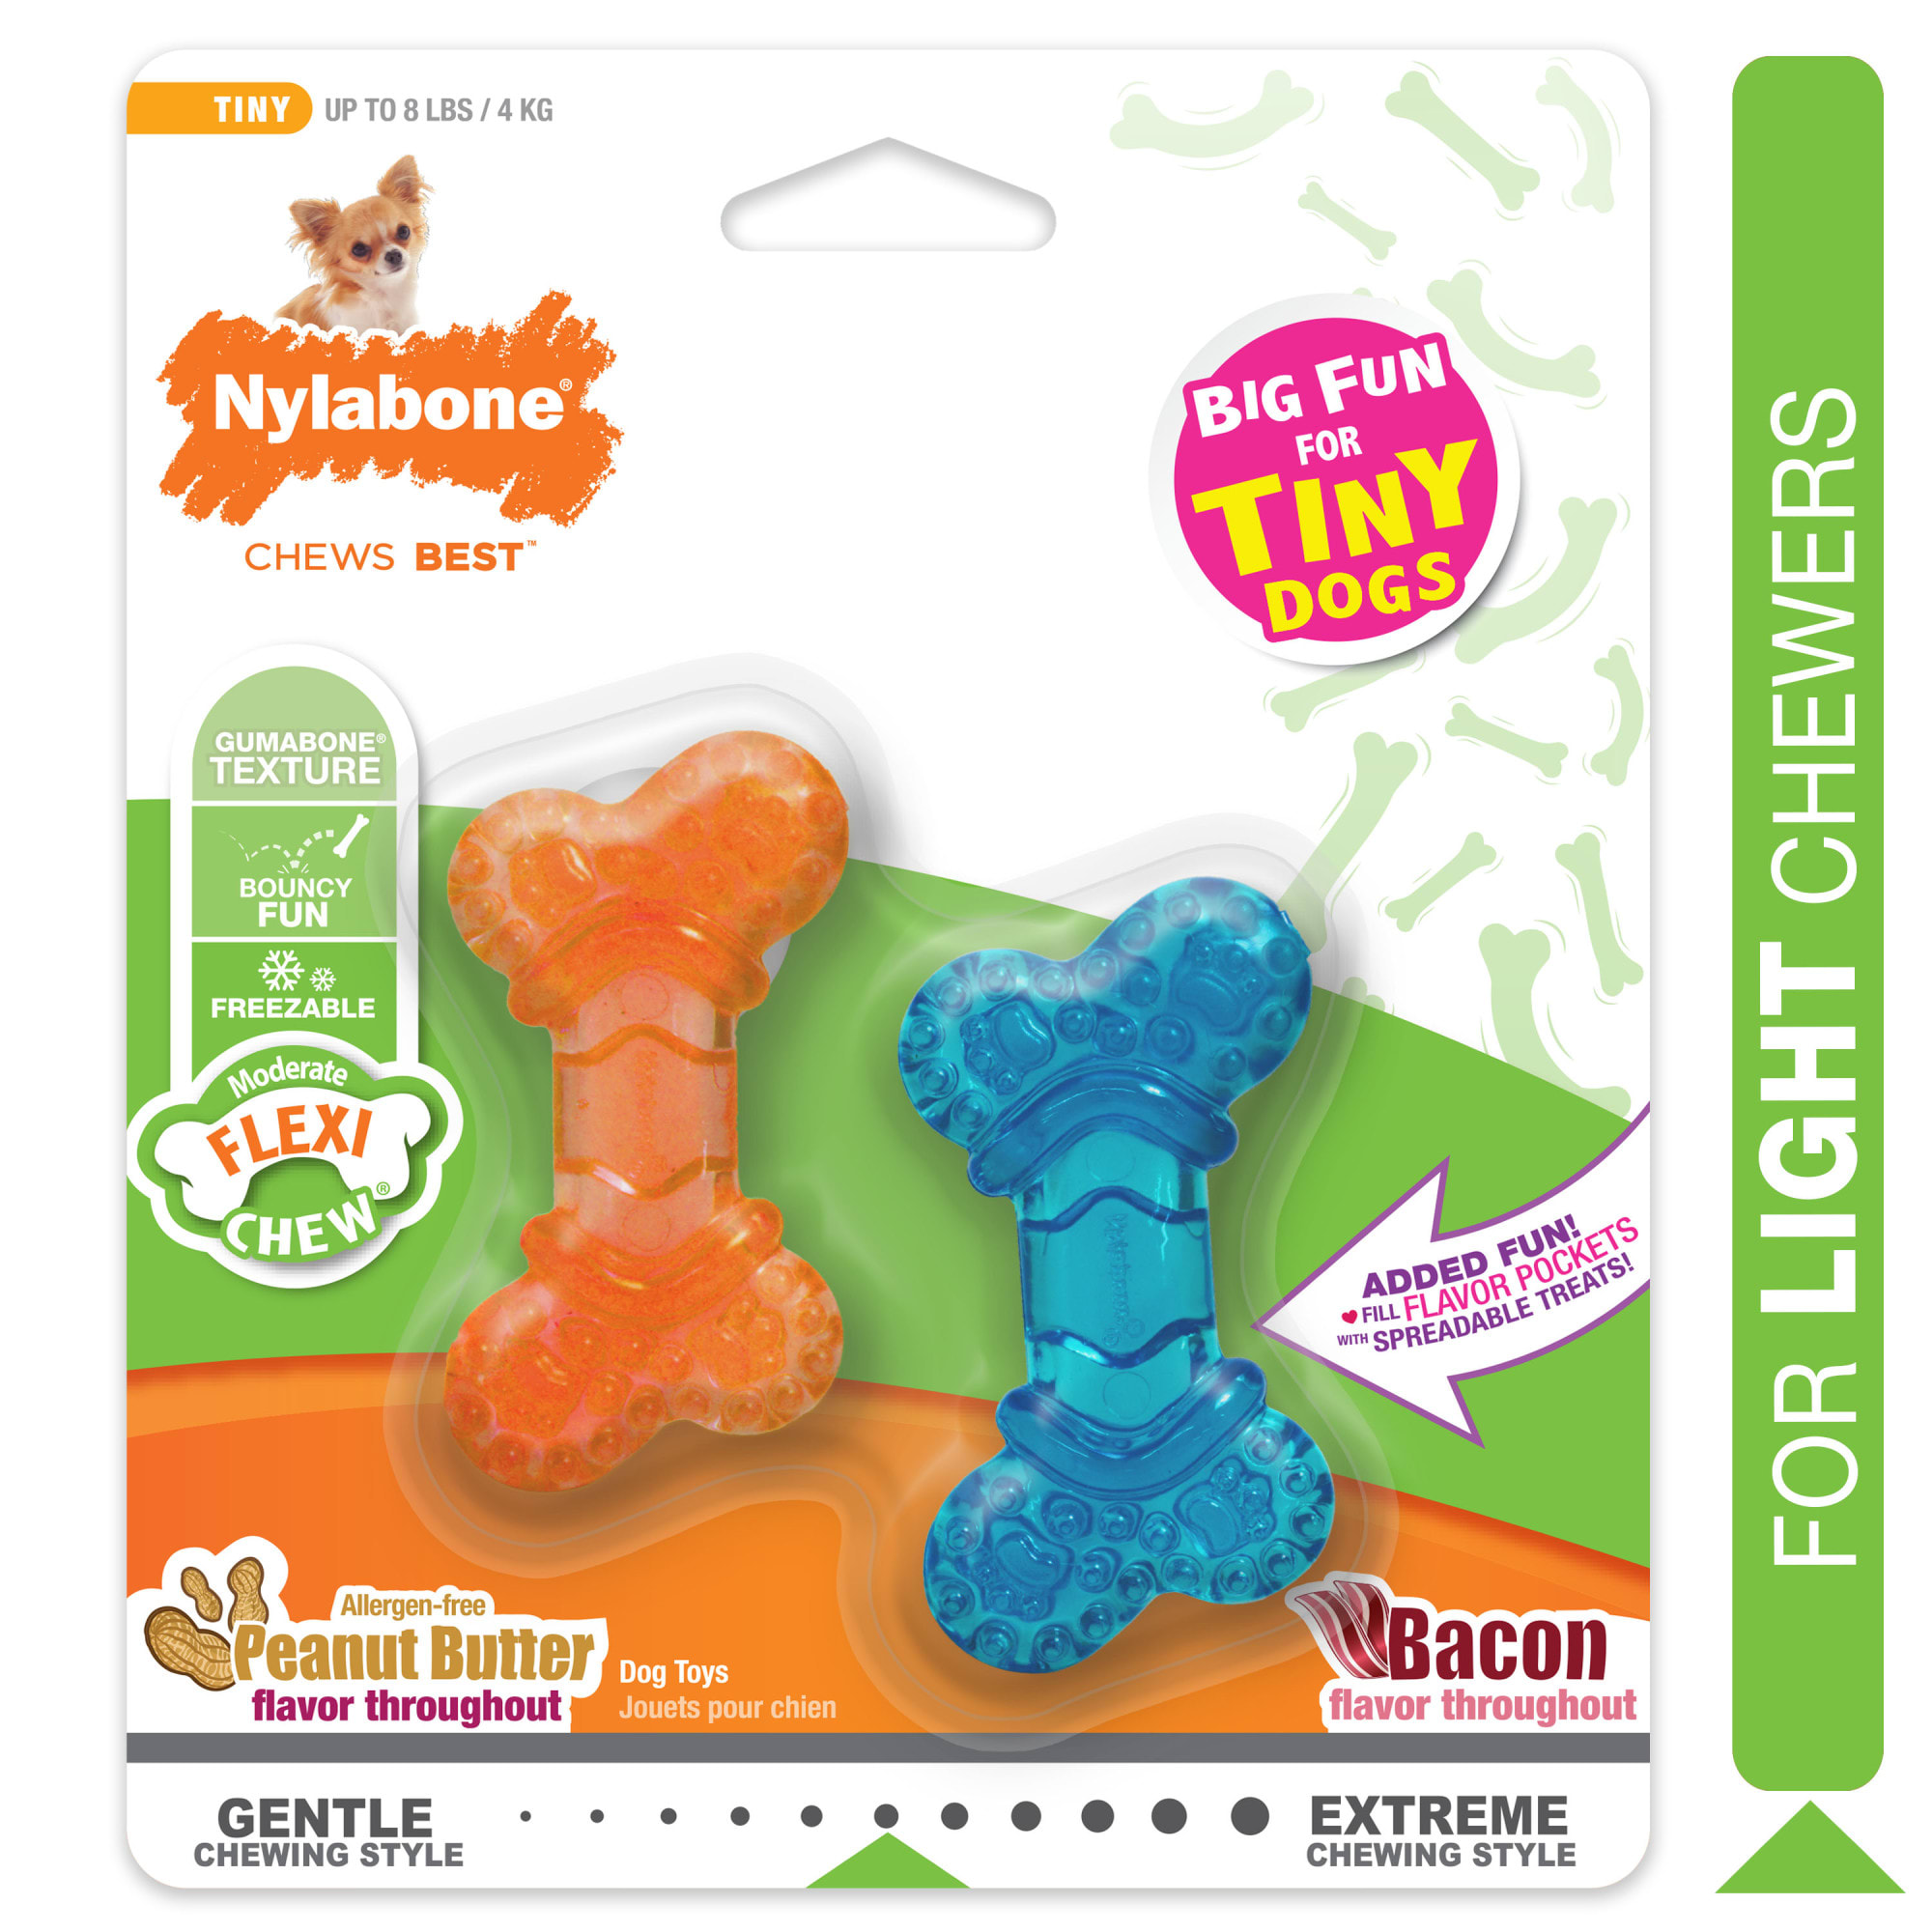 Nylabone Puppy Chew Freezer Dog Toy with Peanut Butter Flavor up to 25 lbs  - Chow Hound Pet Supplies